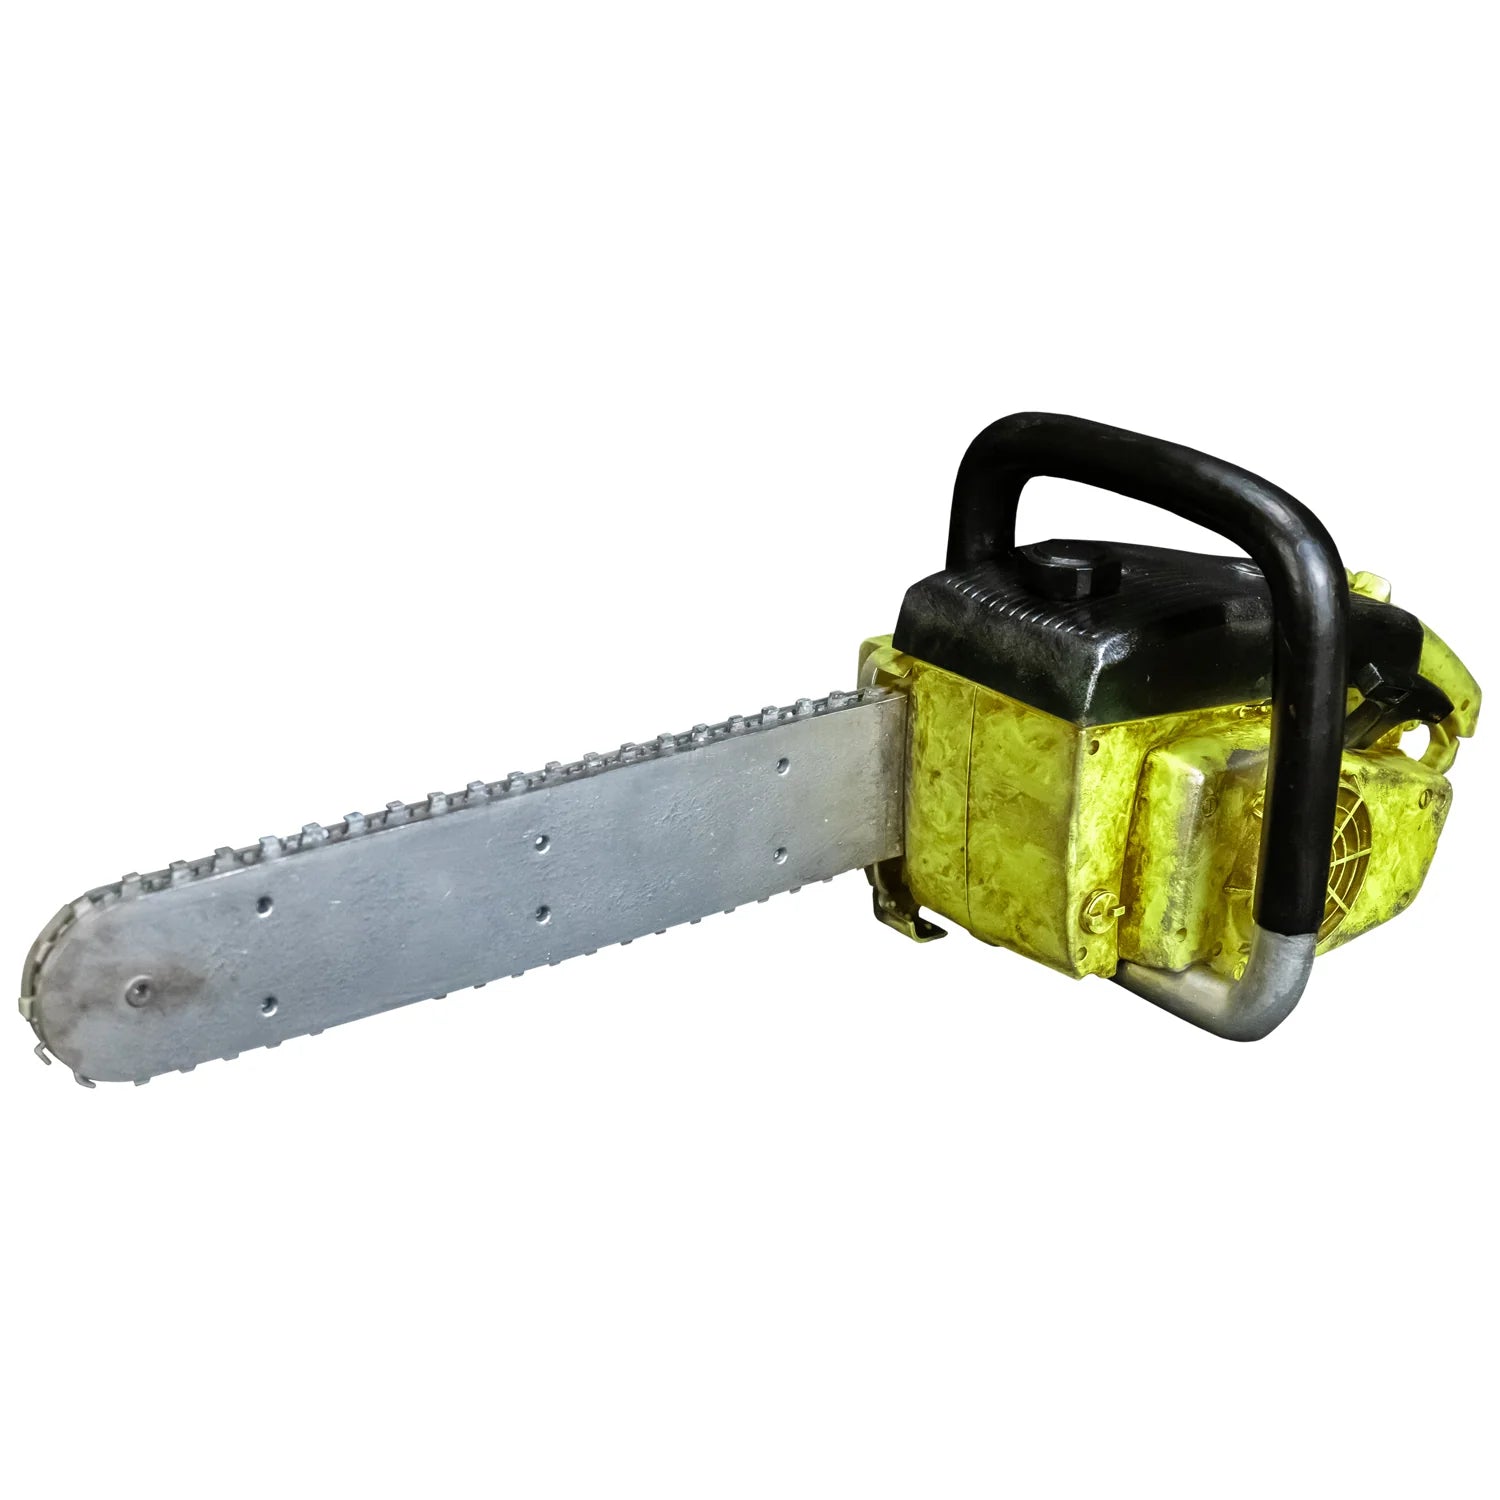 THE TEXAS CHAINSAW MASSACRE | Chainsaw Prop With Sound & Motion-Prop-TTRL145-Classic Horror Shop